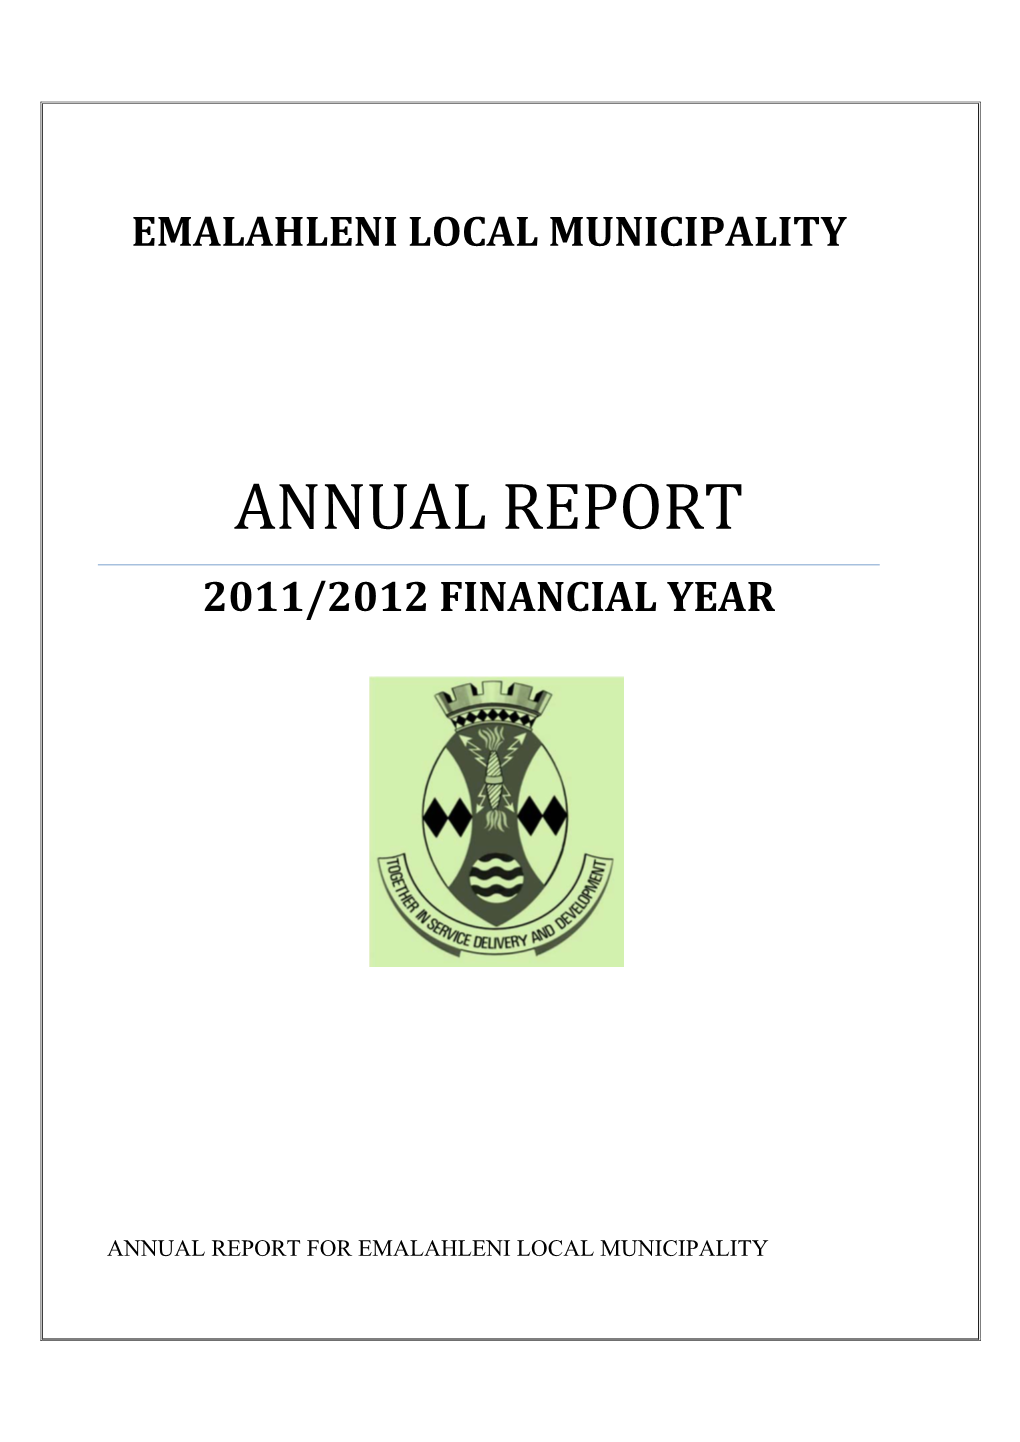 Annual Report 2011/2012 Financial Year